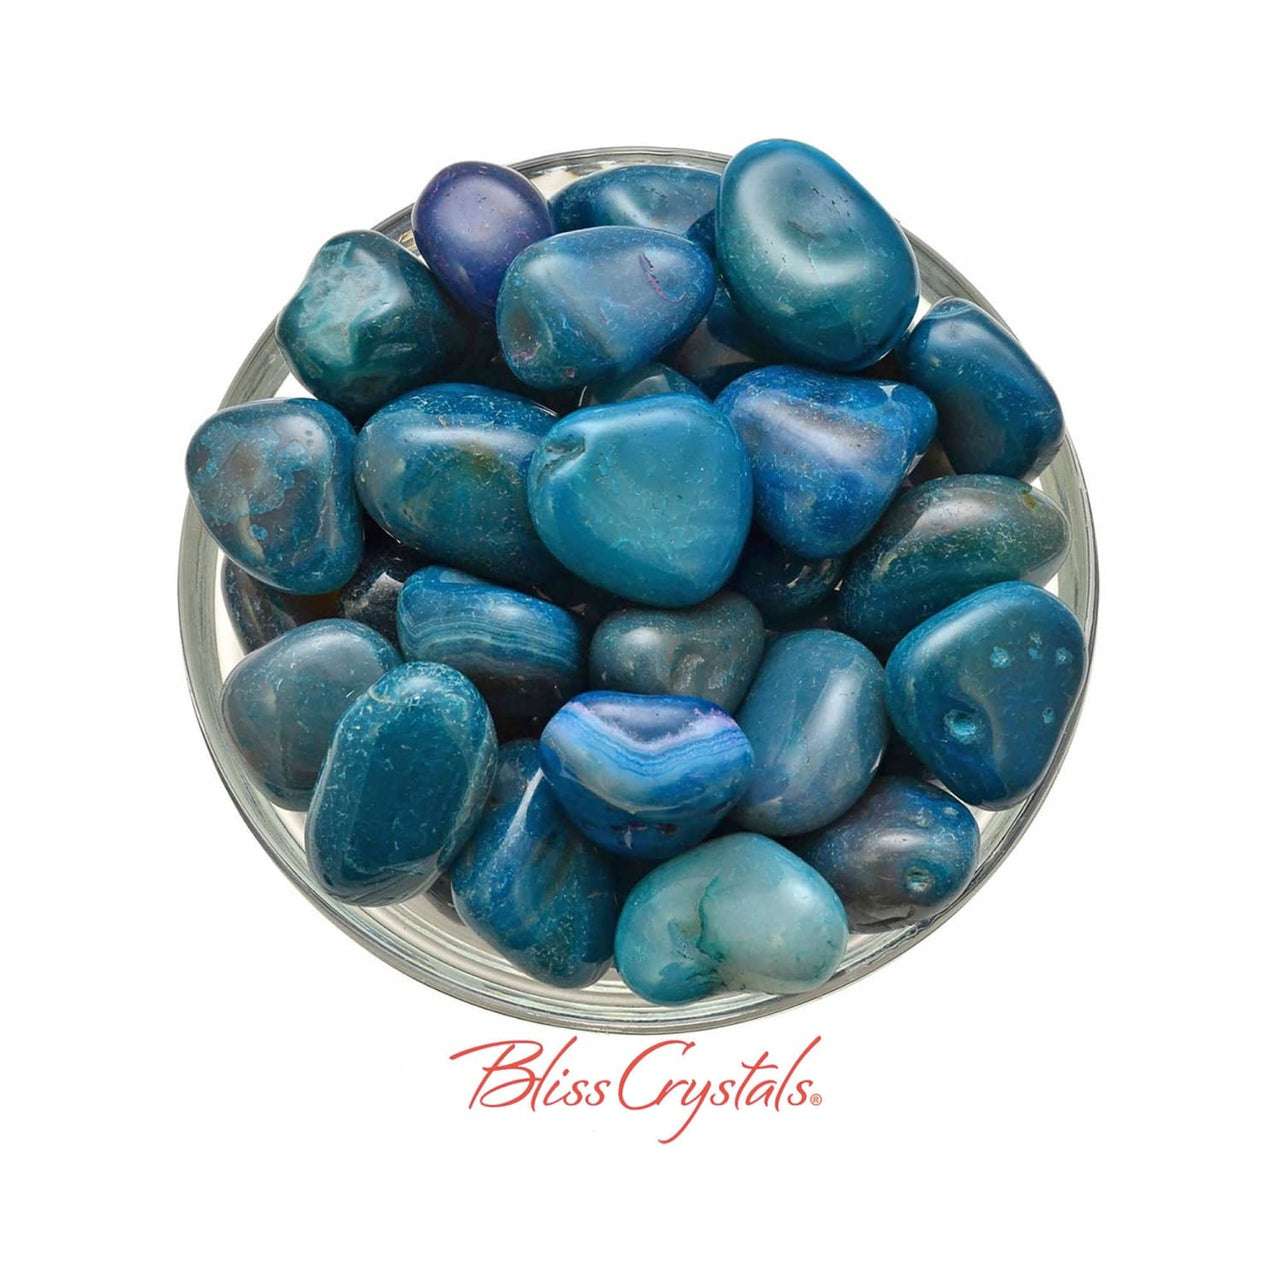 1 Fancy TEAL BLUE AGATE Tumbled Stone Crystal Color Enhanced